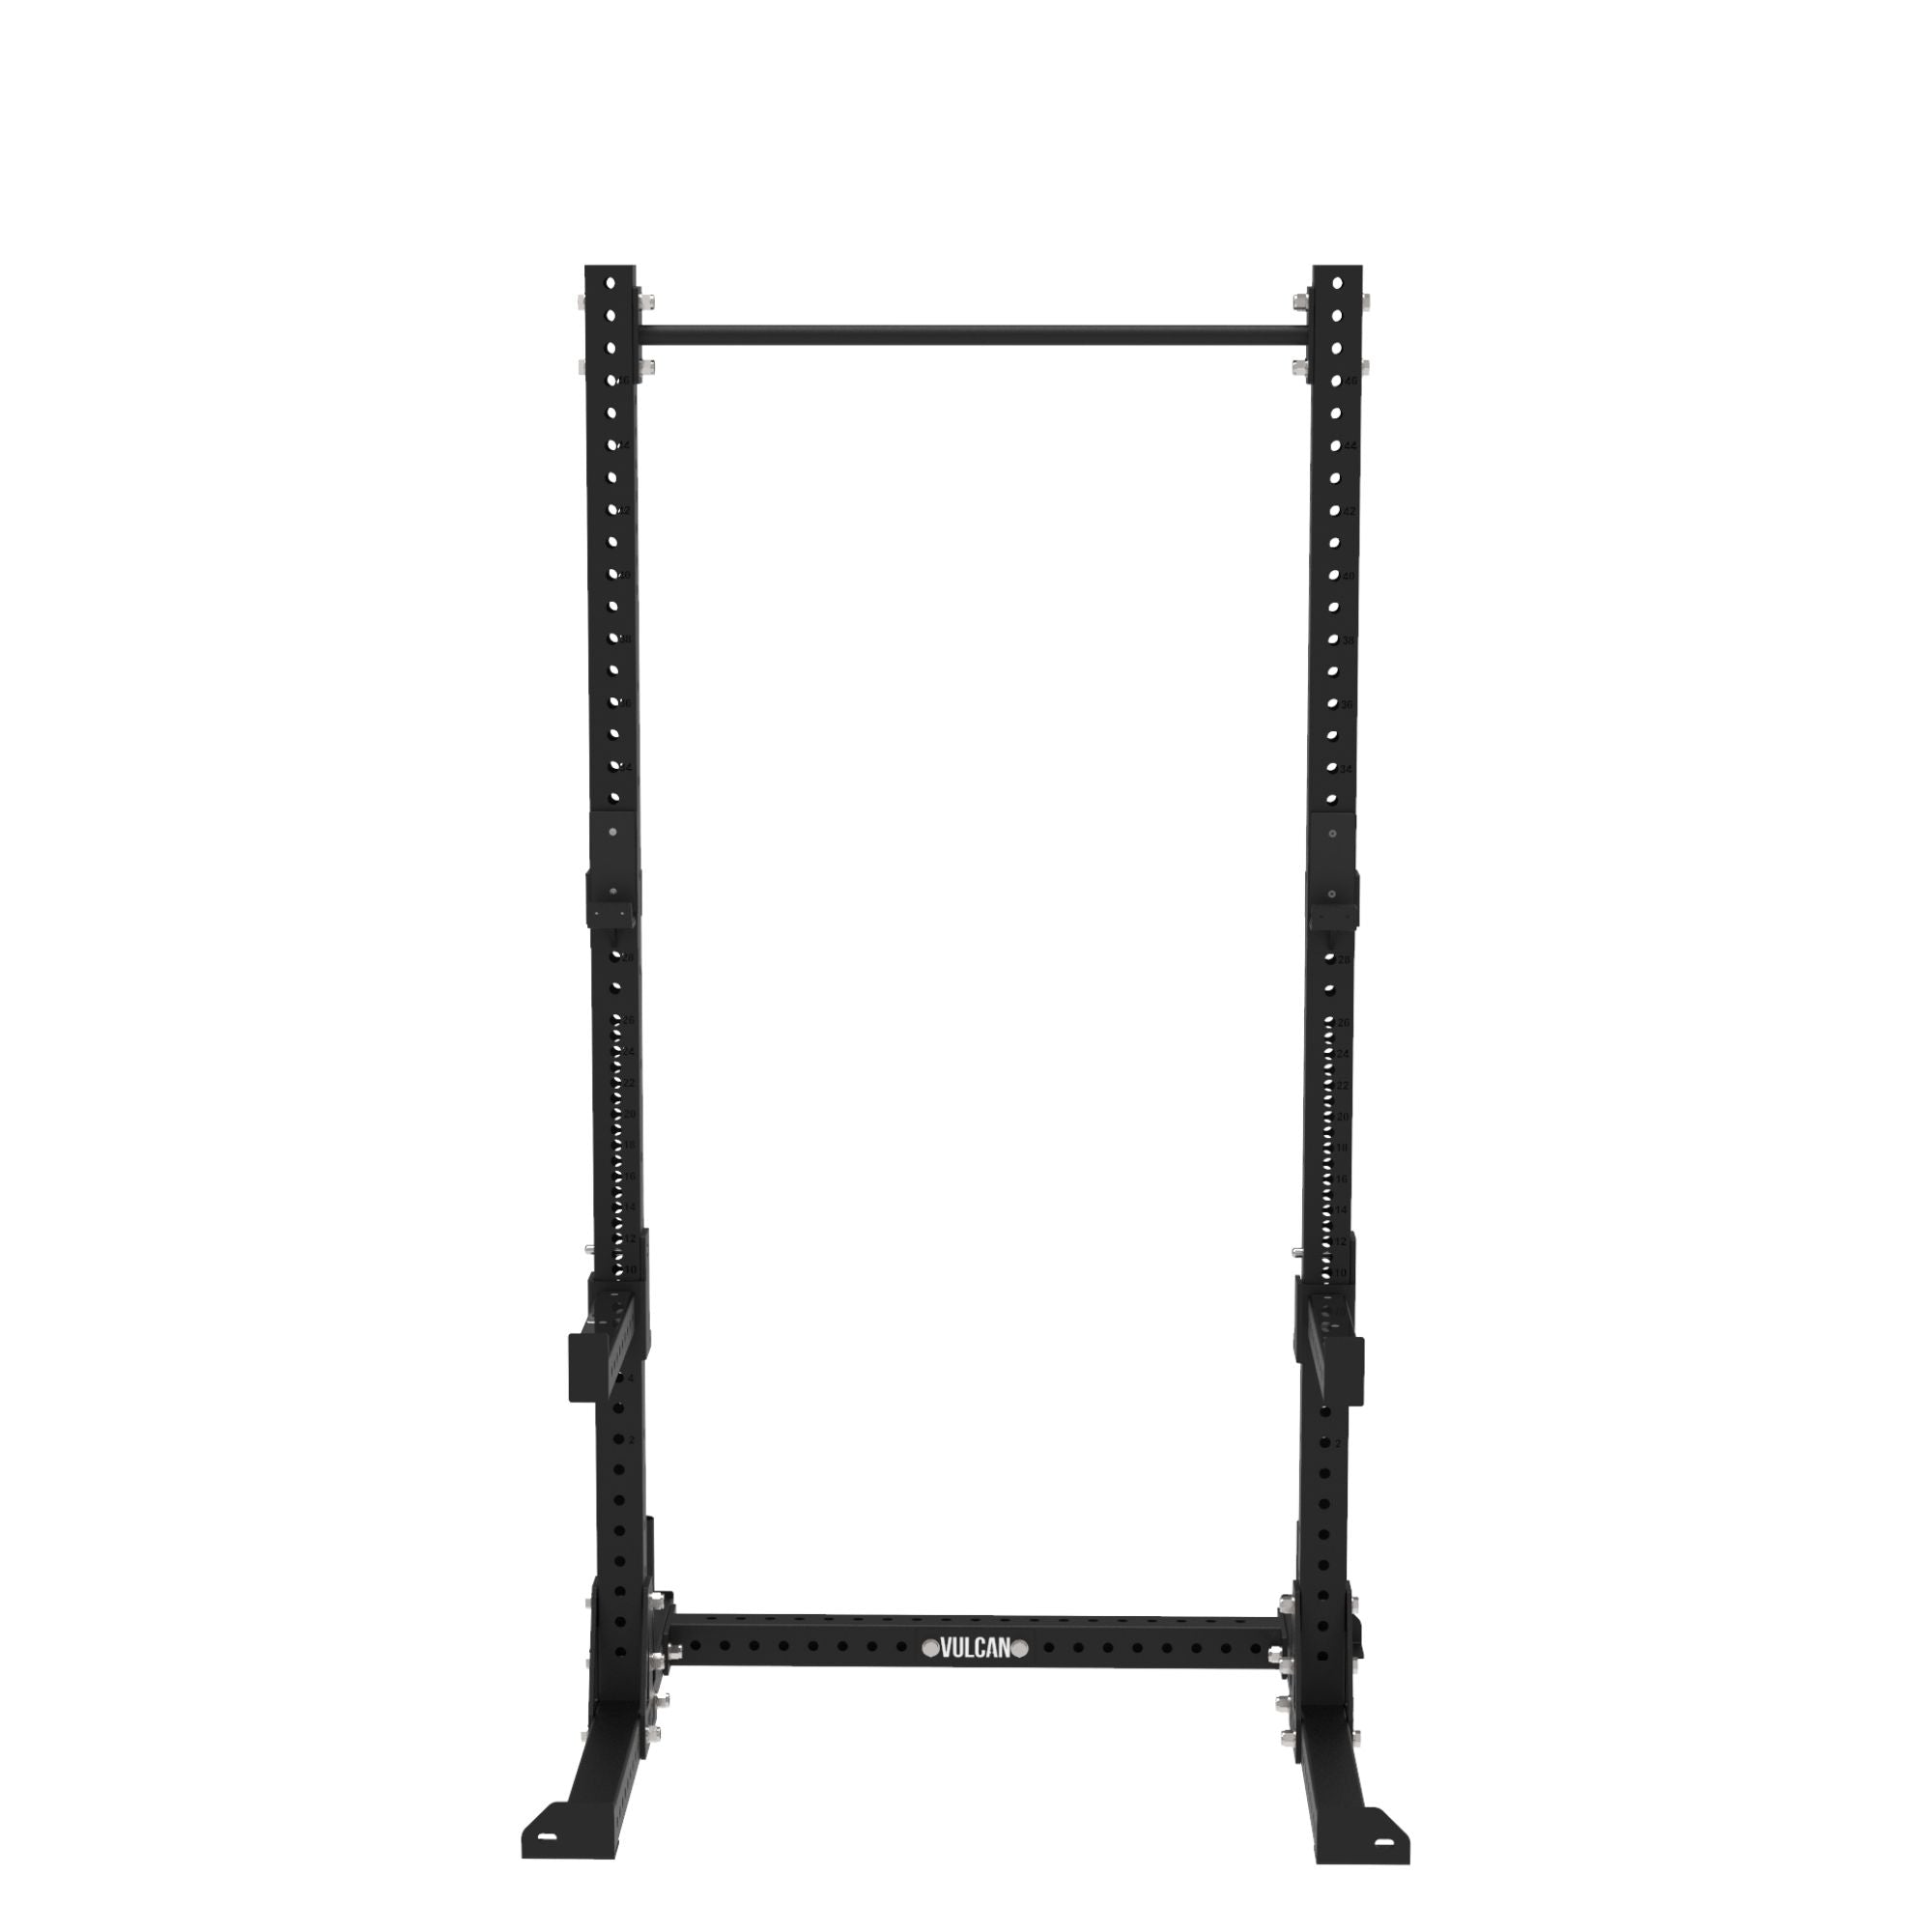 squat rack in a home gym